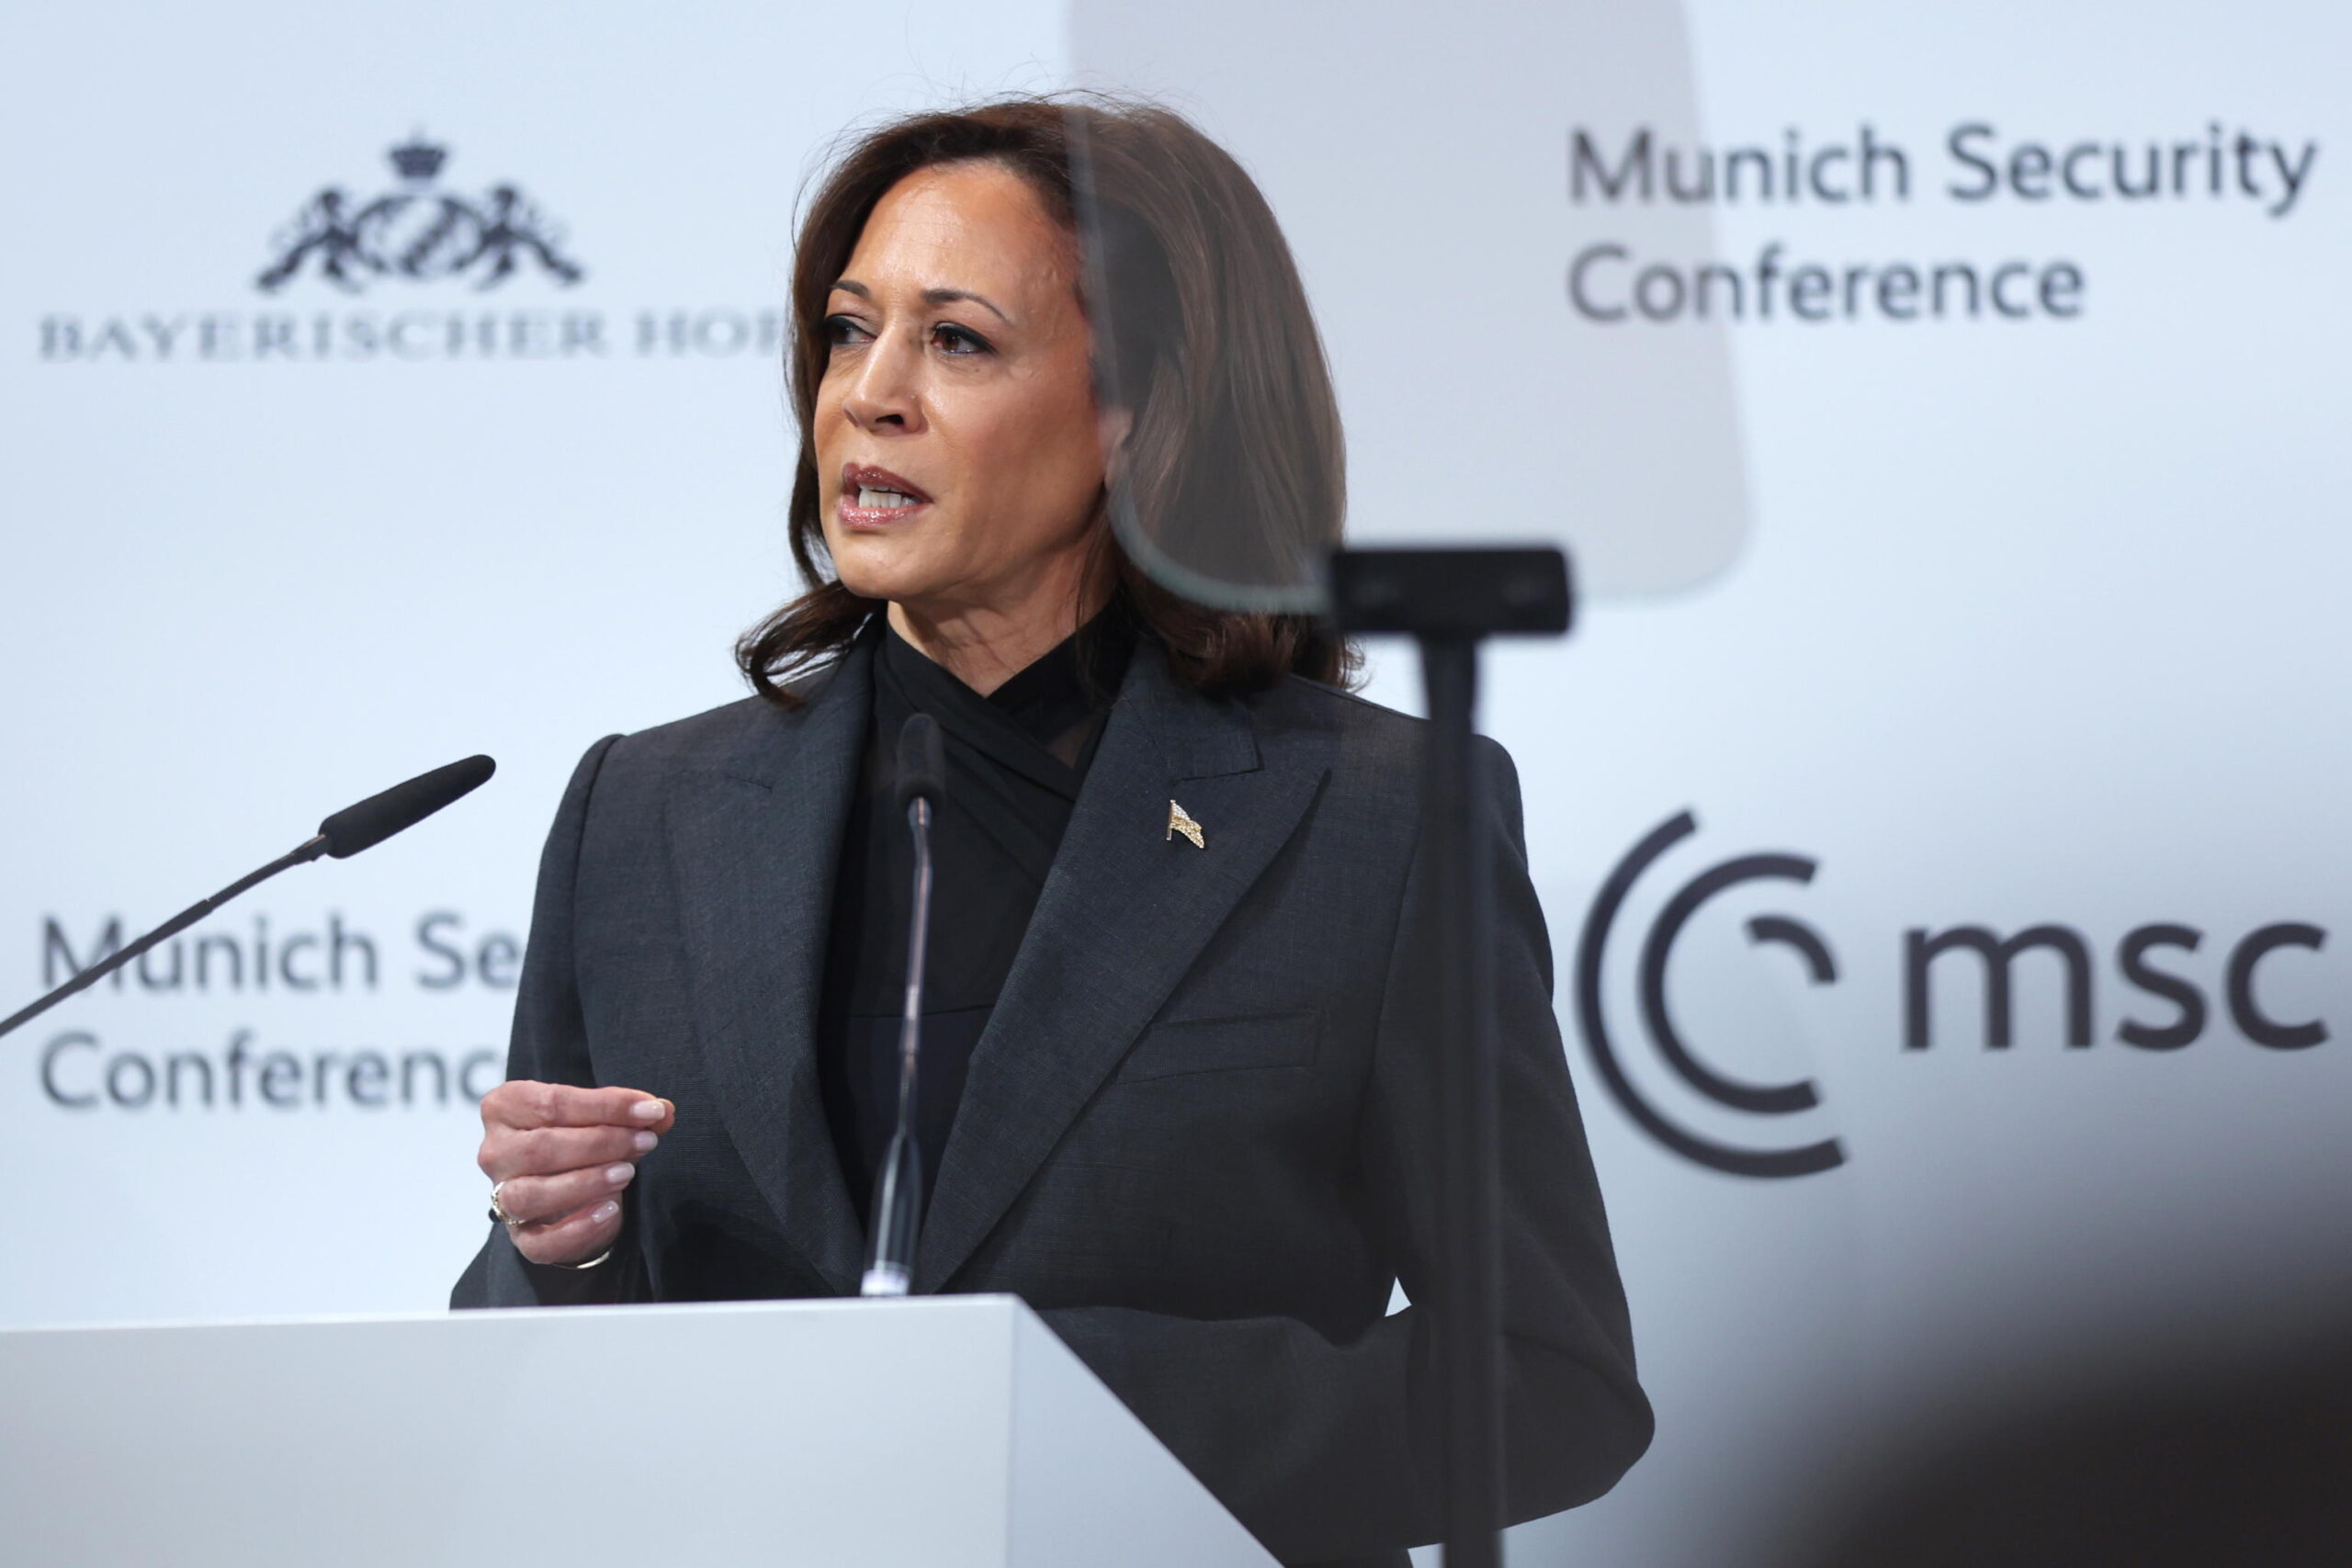 epa10474691 US Vice President Kamala Harris speaks during the 2023 Munich Security Conference (MSC) in Munich, Germany, 18 February 2023. The Munich Security Conference brings together defence leaders and stakeholders from around the world and is taking place February 17-19. Russia's ongoing war in Ukraine is dominating the agenda.  EPA/JOHANNES SIMON / POOL